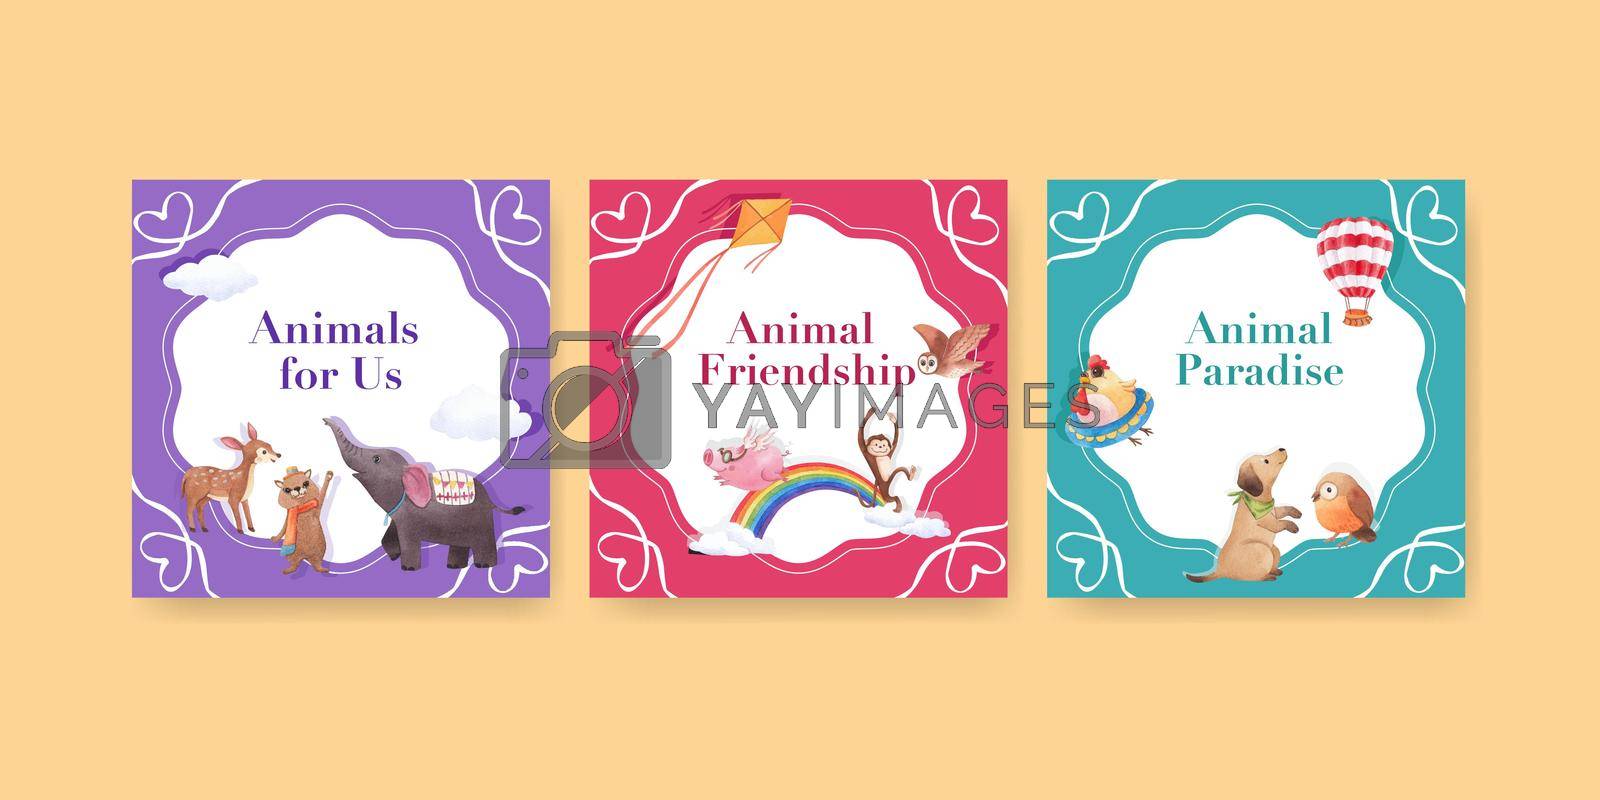 Advertise template with happy animals concept design watercolor illustration
